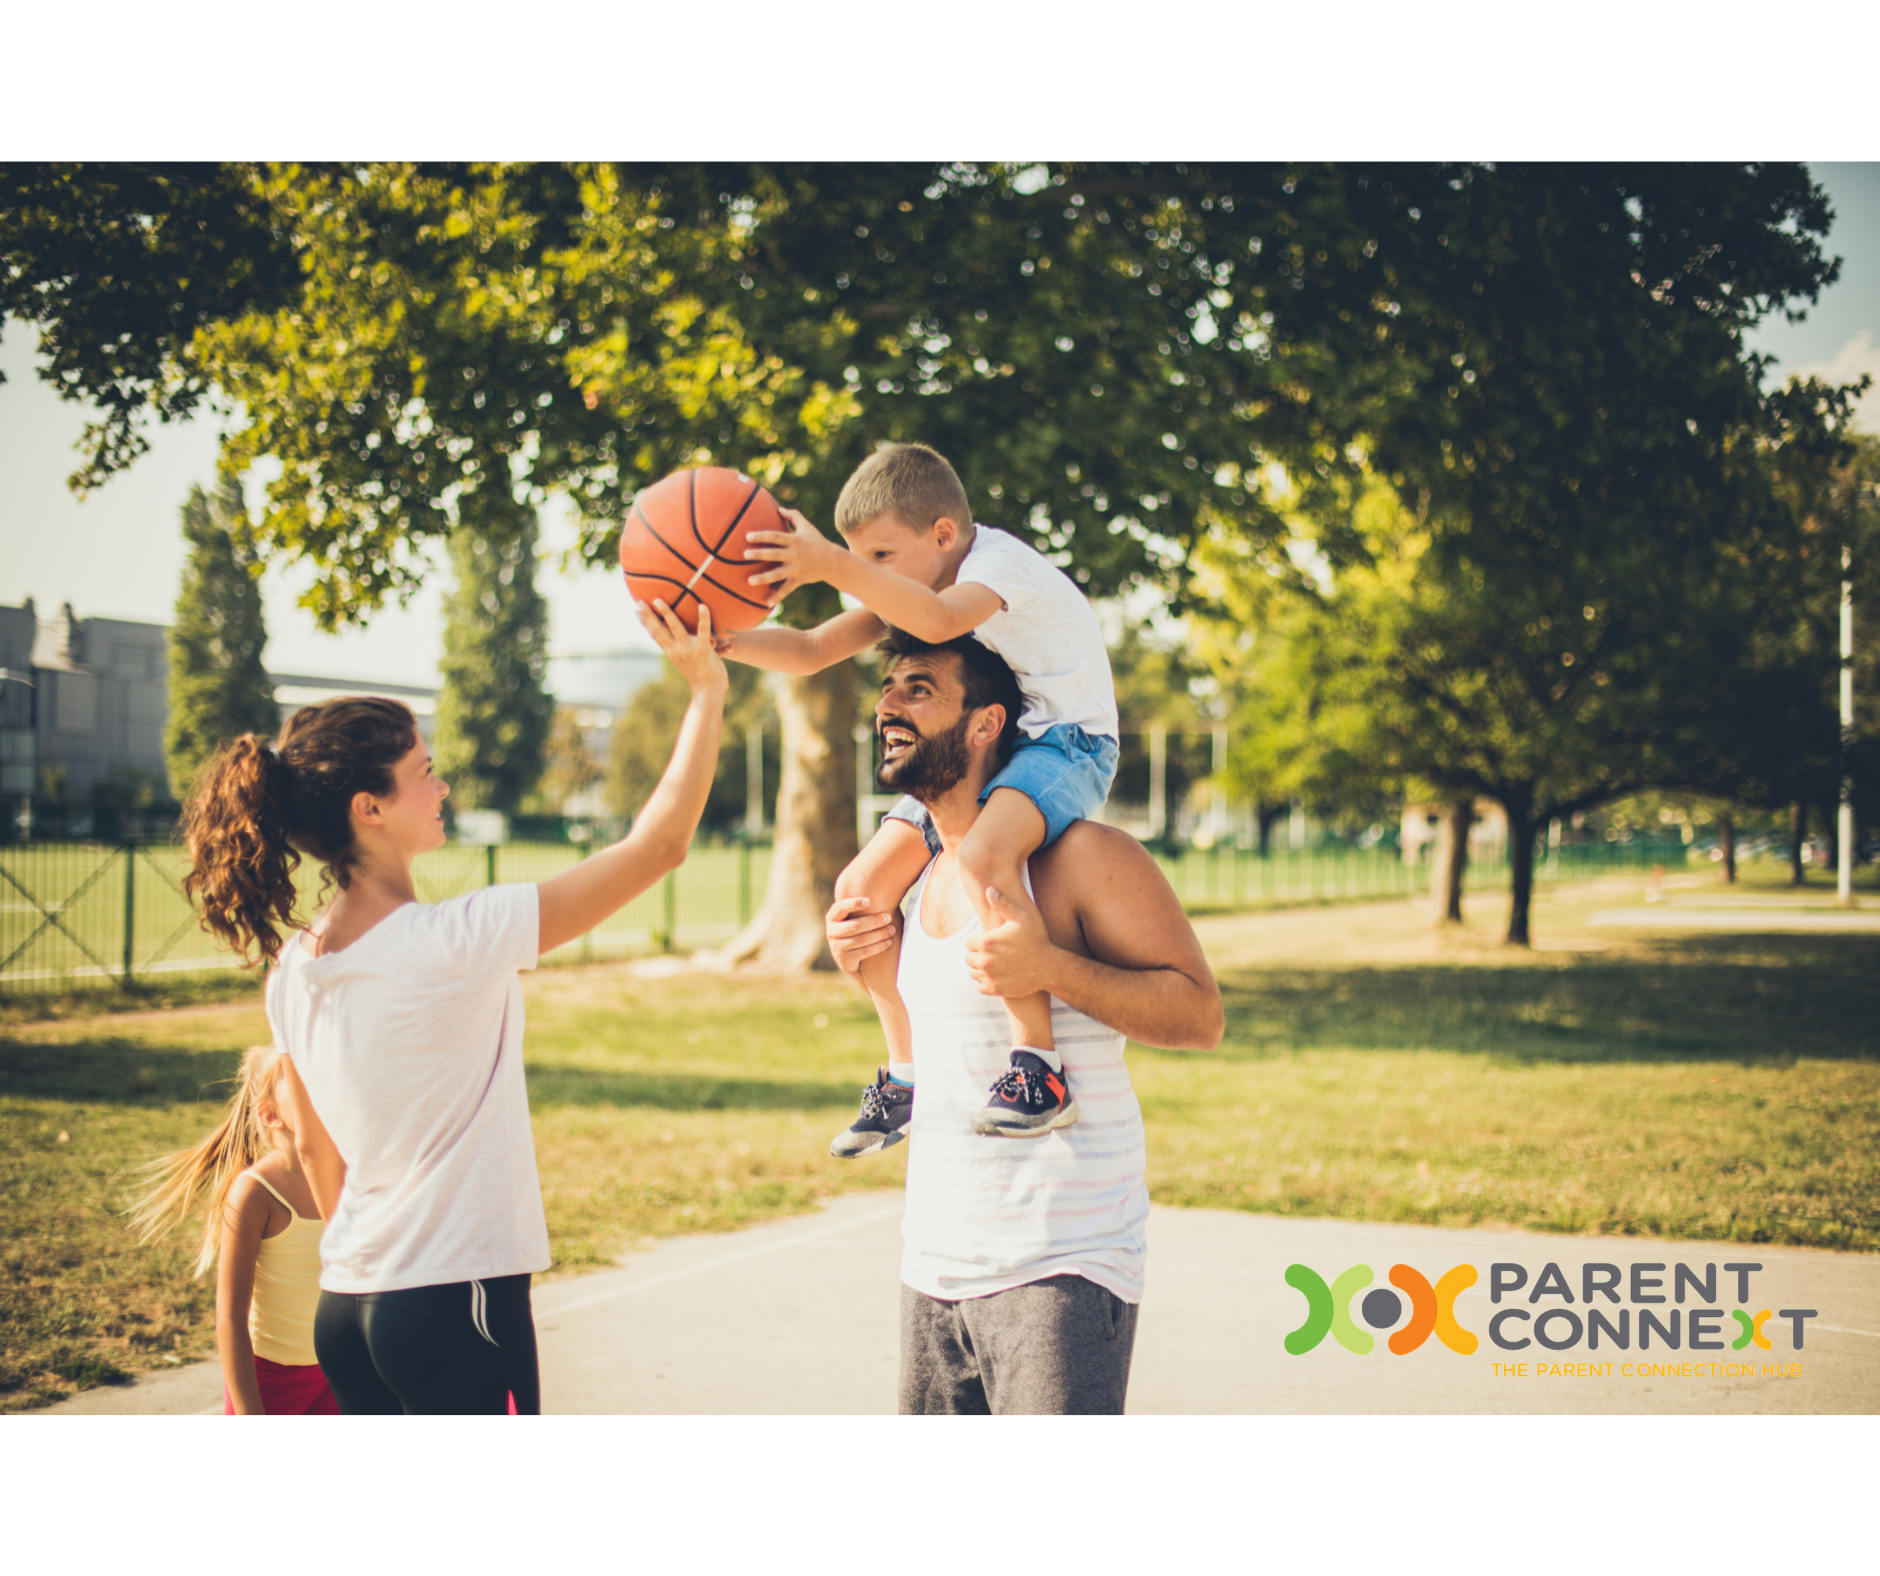 Get Your Family Moving with these Tips from Parent Connext™